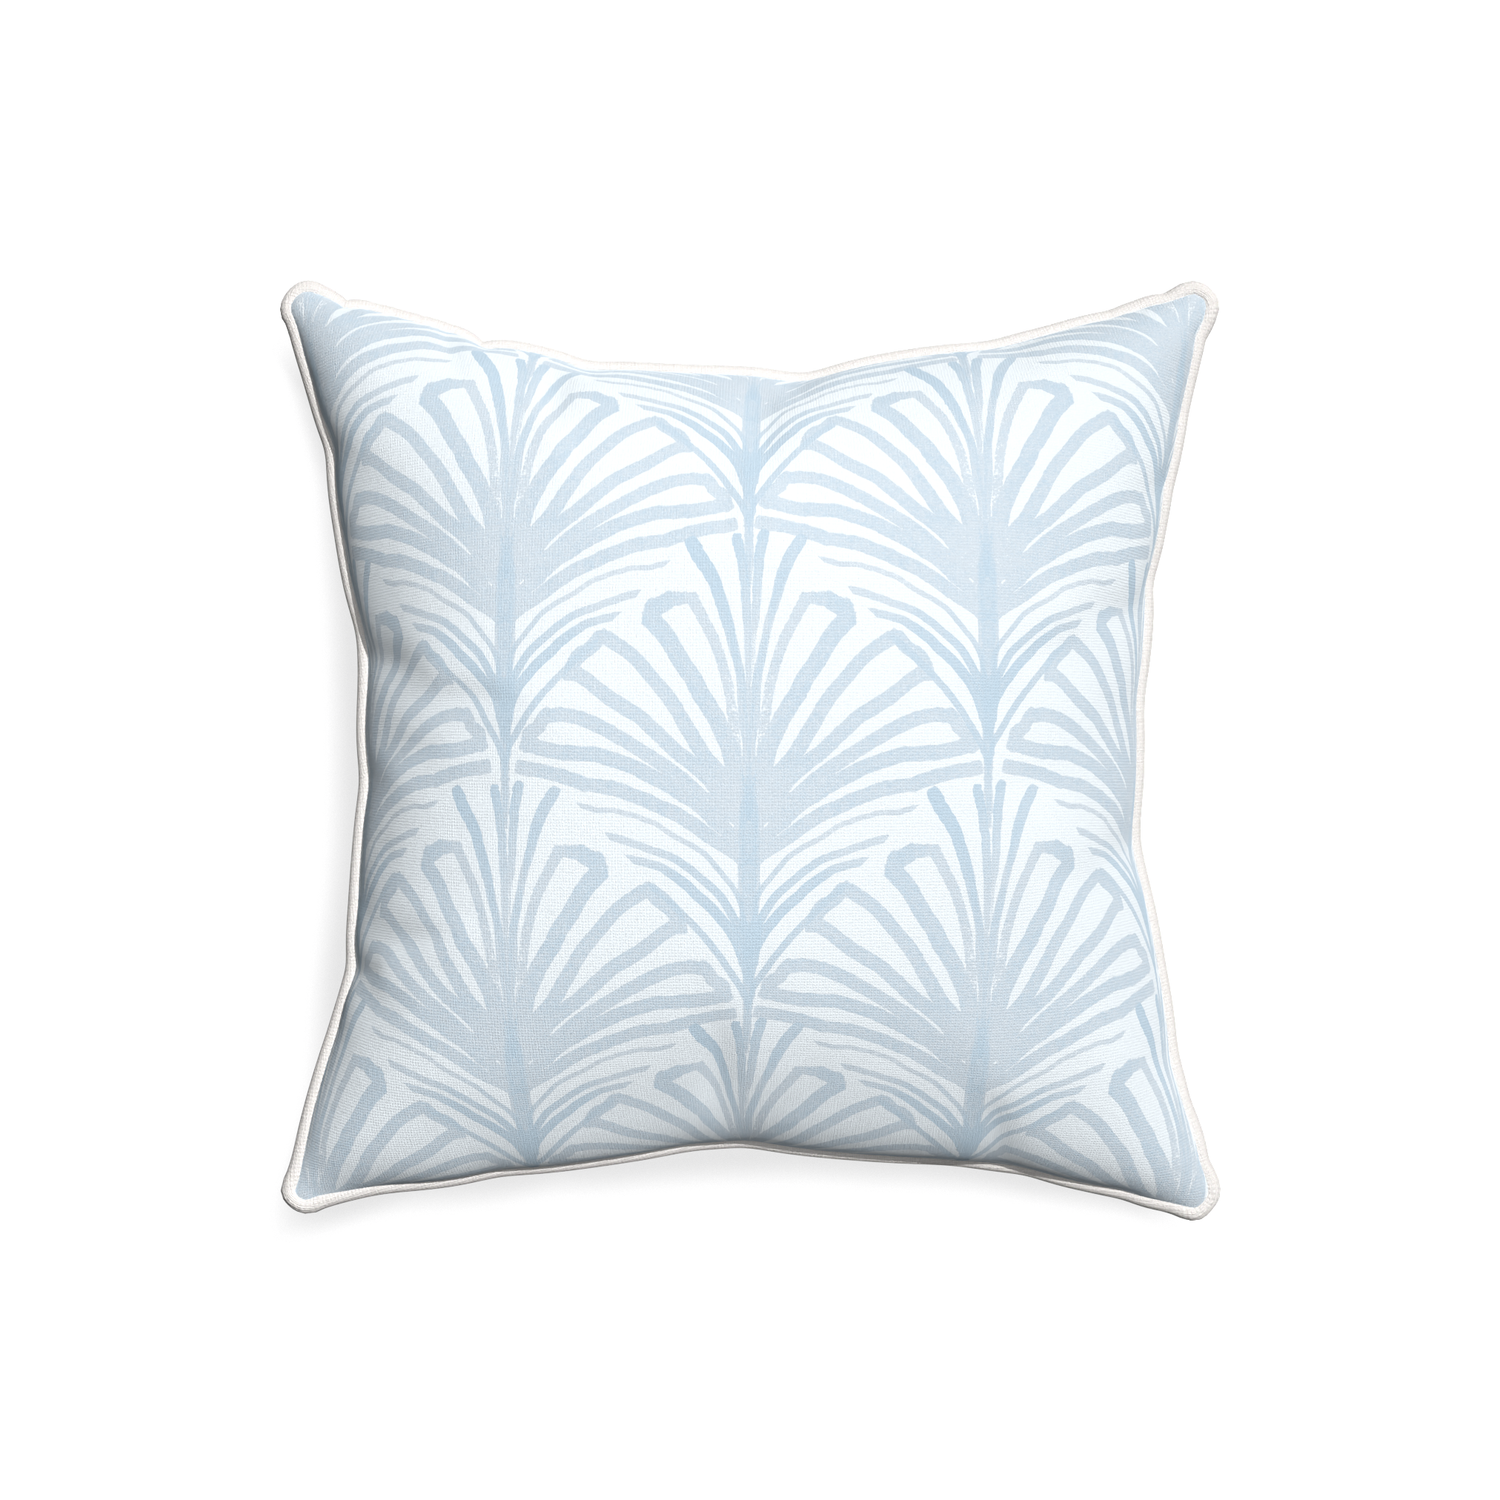 20-square suzy sky custom pillow with snow piping on white background